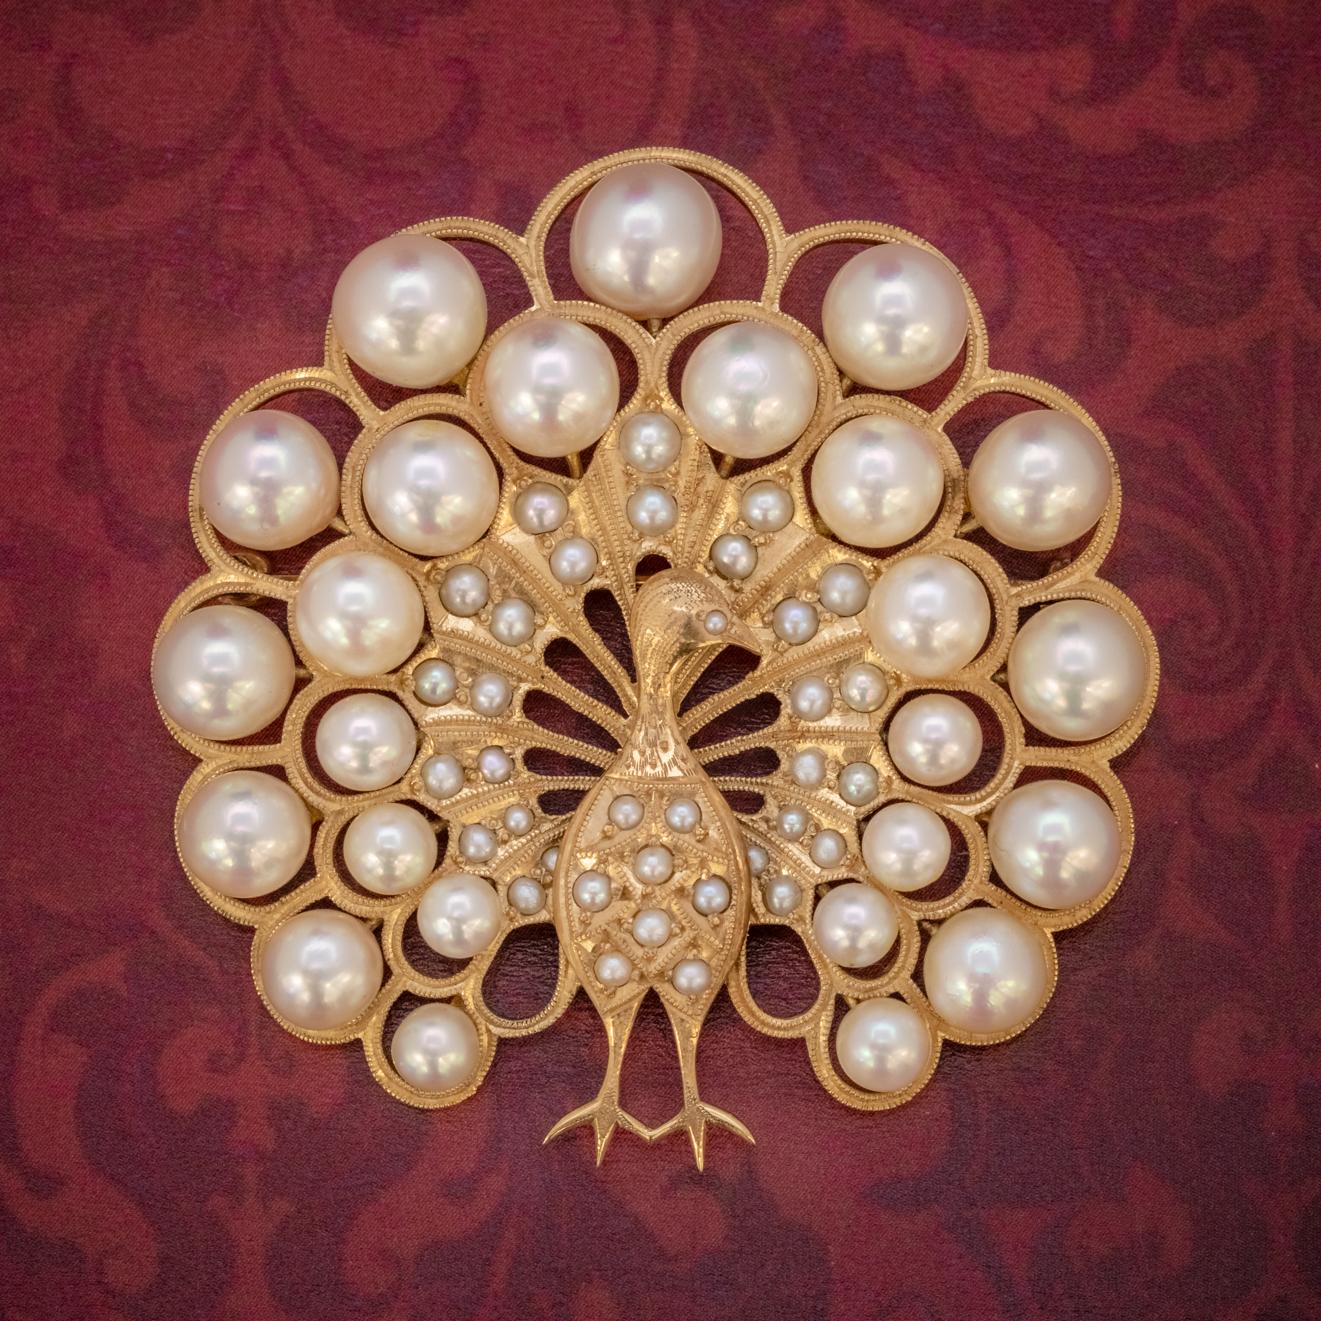 A majestic Vintage Peacock brooch decorated with an array of lustrous cultured Pearls of various sizes that graduate out from the body and across the peacock’s large and extravagant tail feathers. 

The piece is a wonderful open-worked design, with